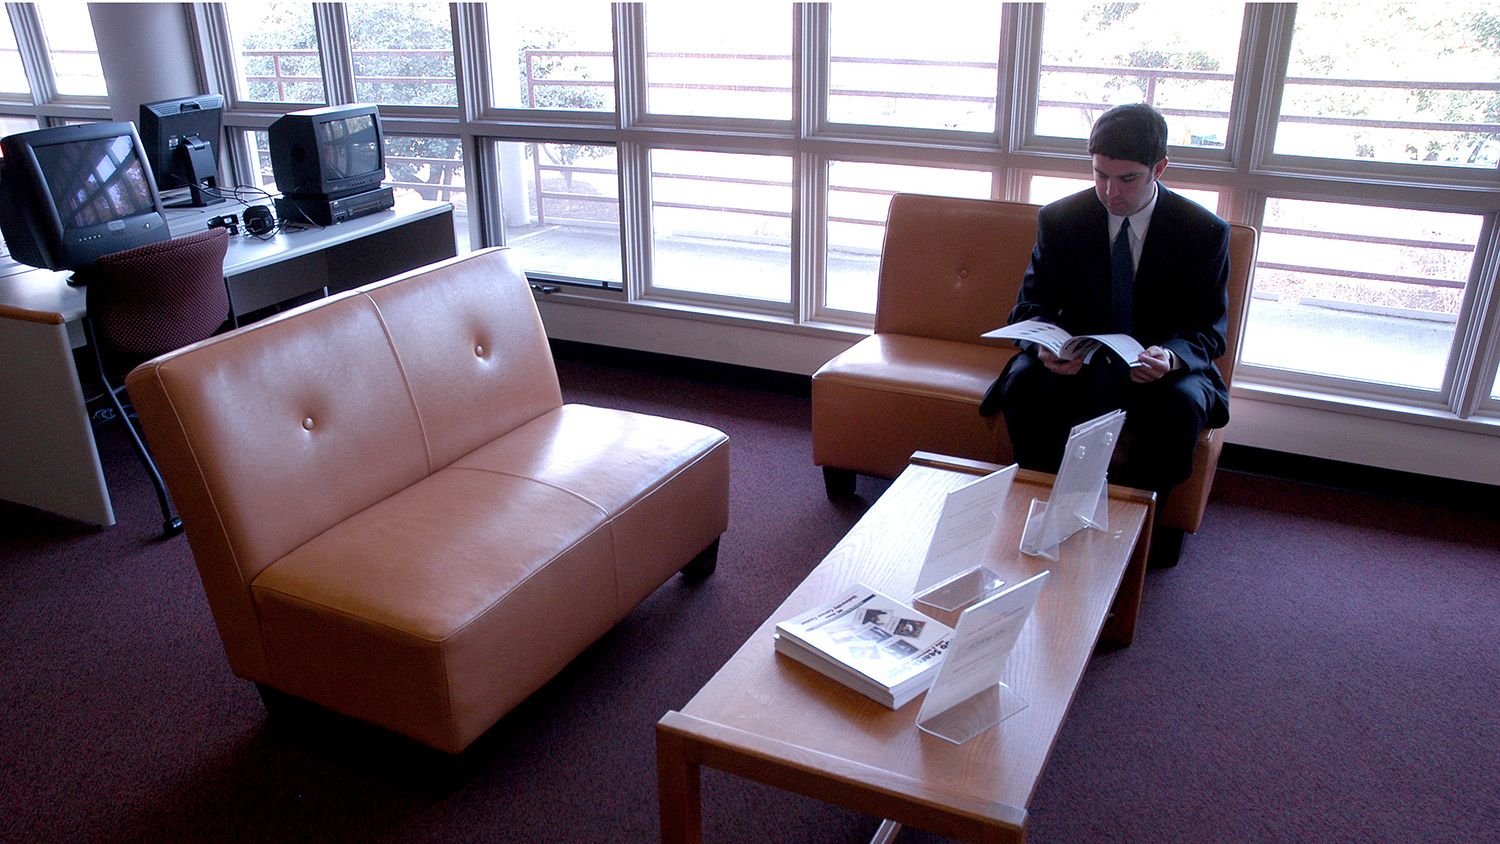 Student in a business suit waiting for an appointment at the CALS Career Center.